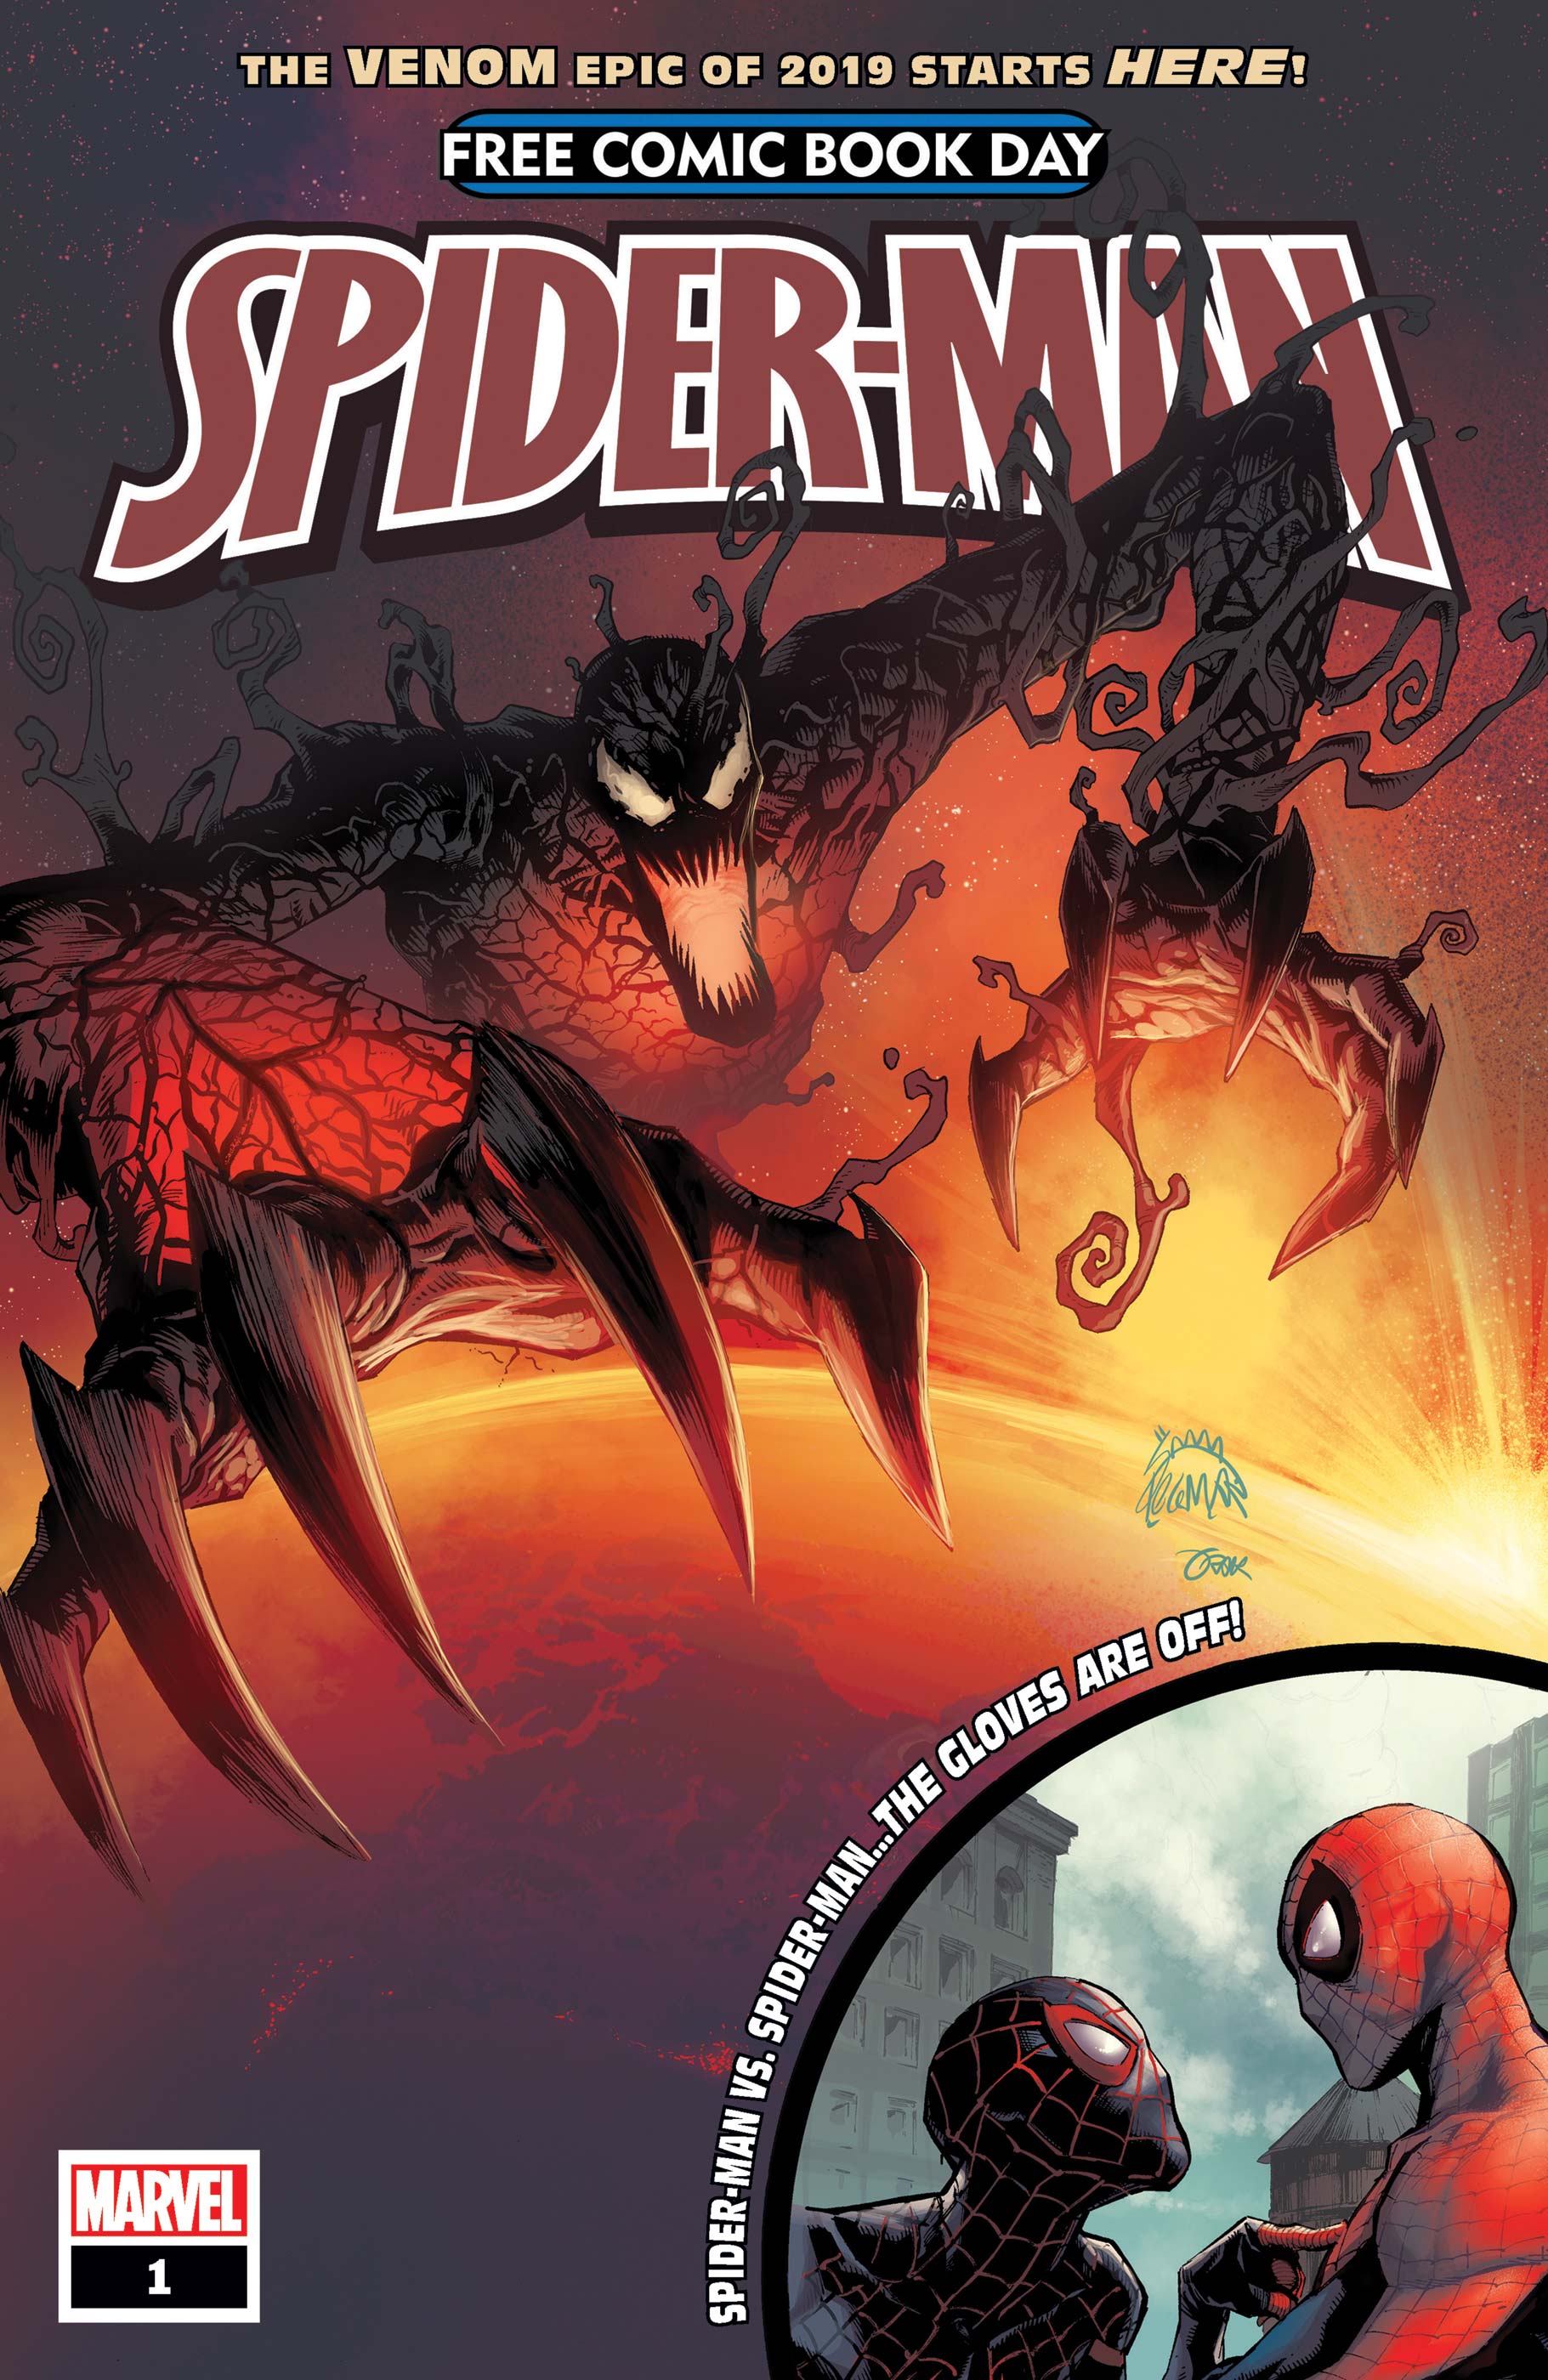 Free Comic Book Day (SpiderMan) (2019) 1 Comic Issues Marvel